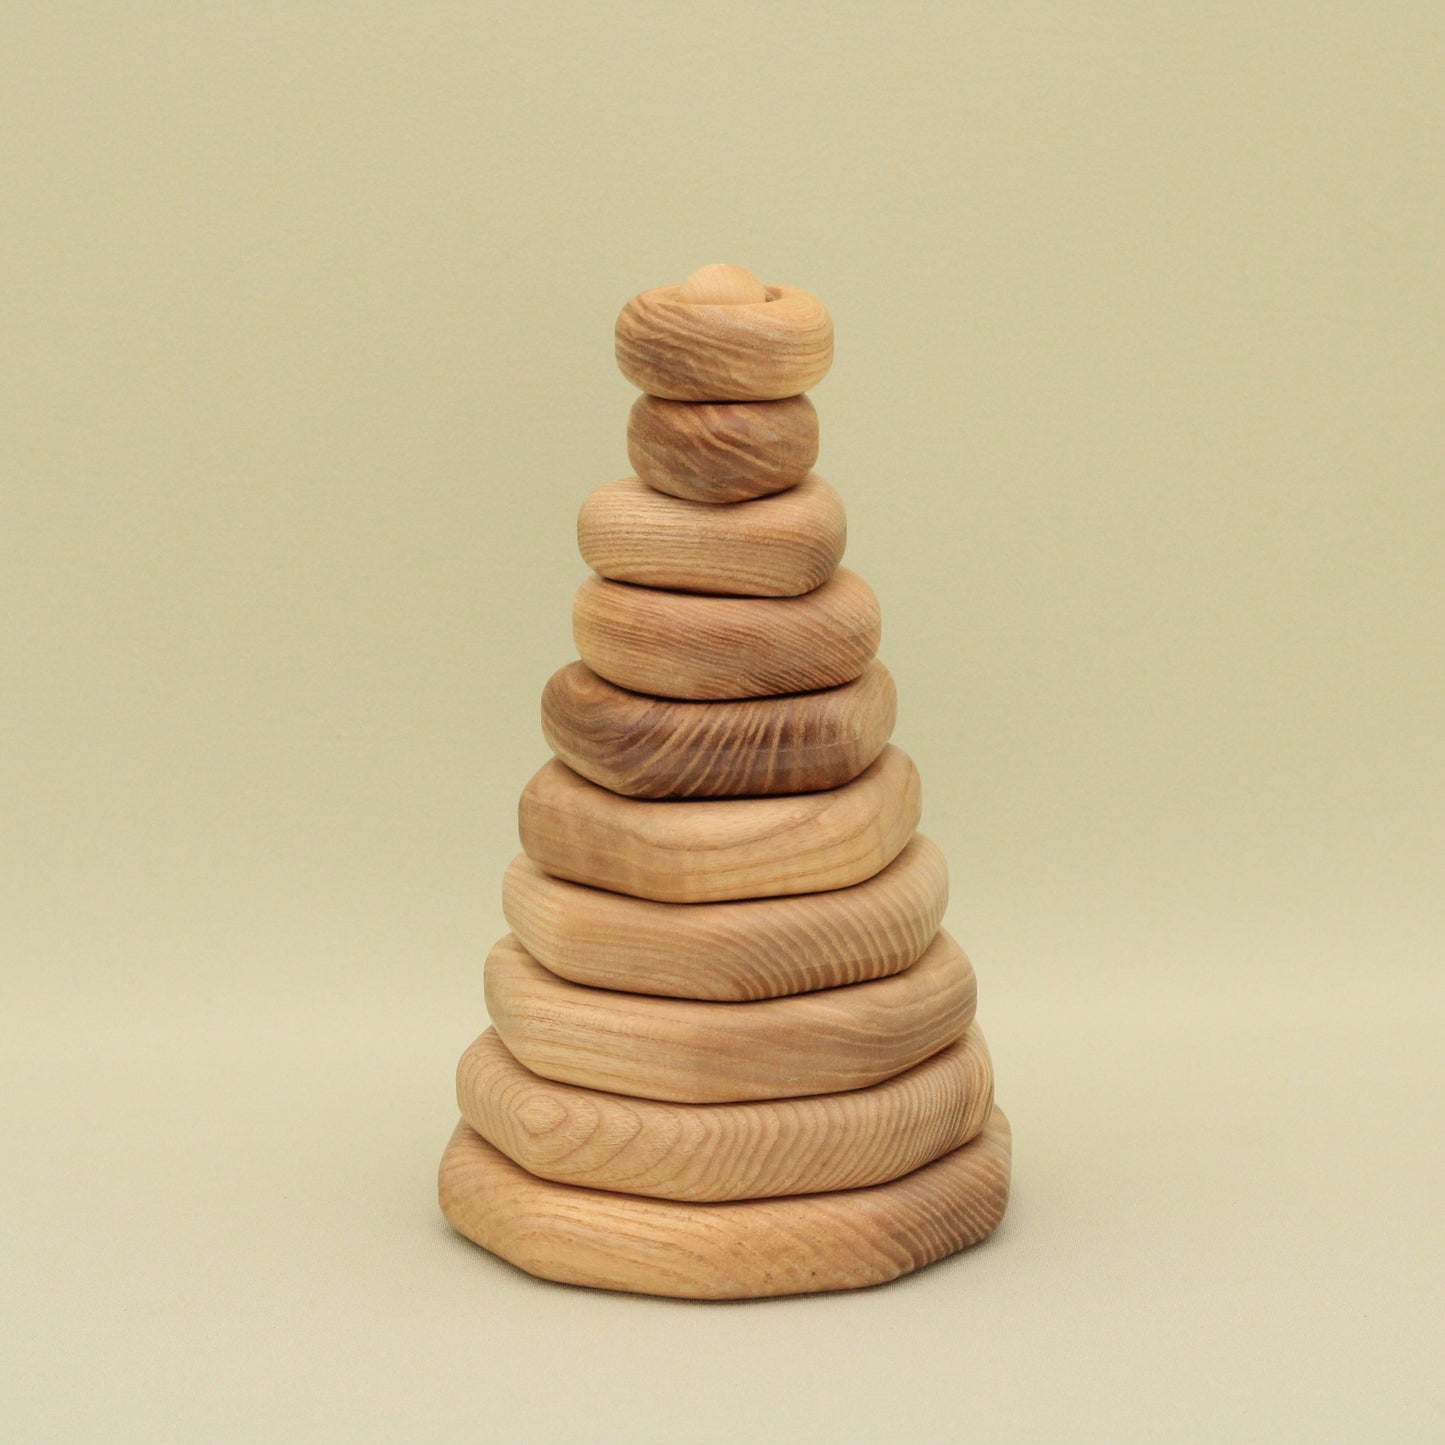 Lotes Toys Natural Geometric Wooden Stacking Pyramid - 10 pieces PY04